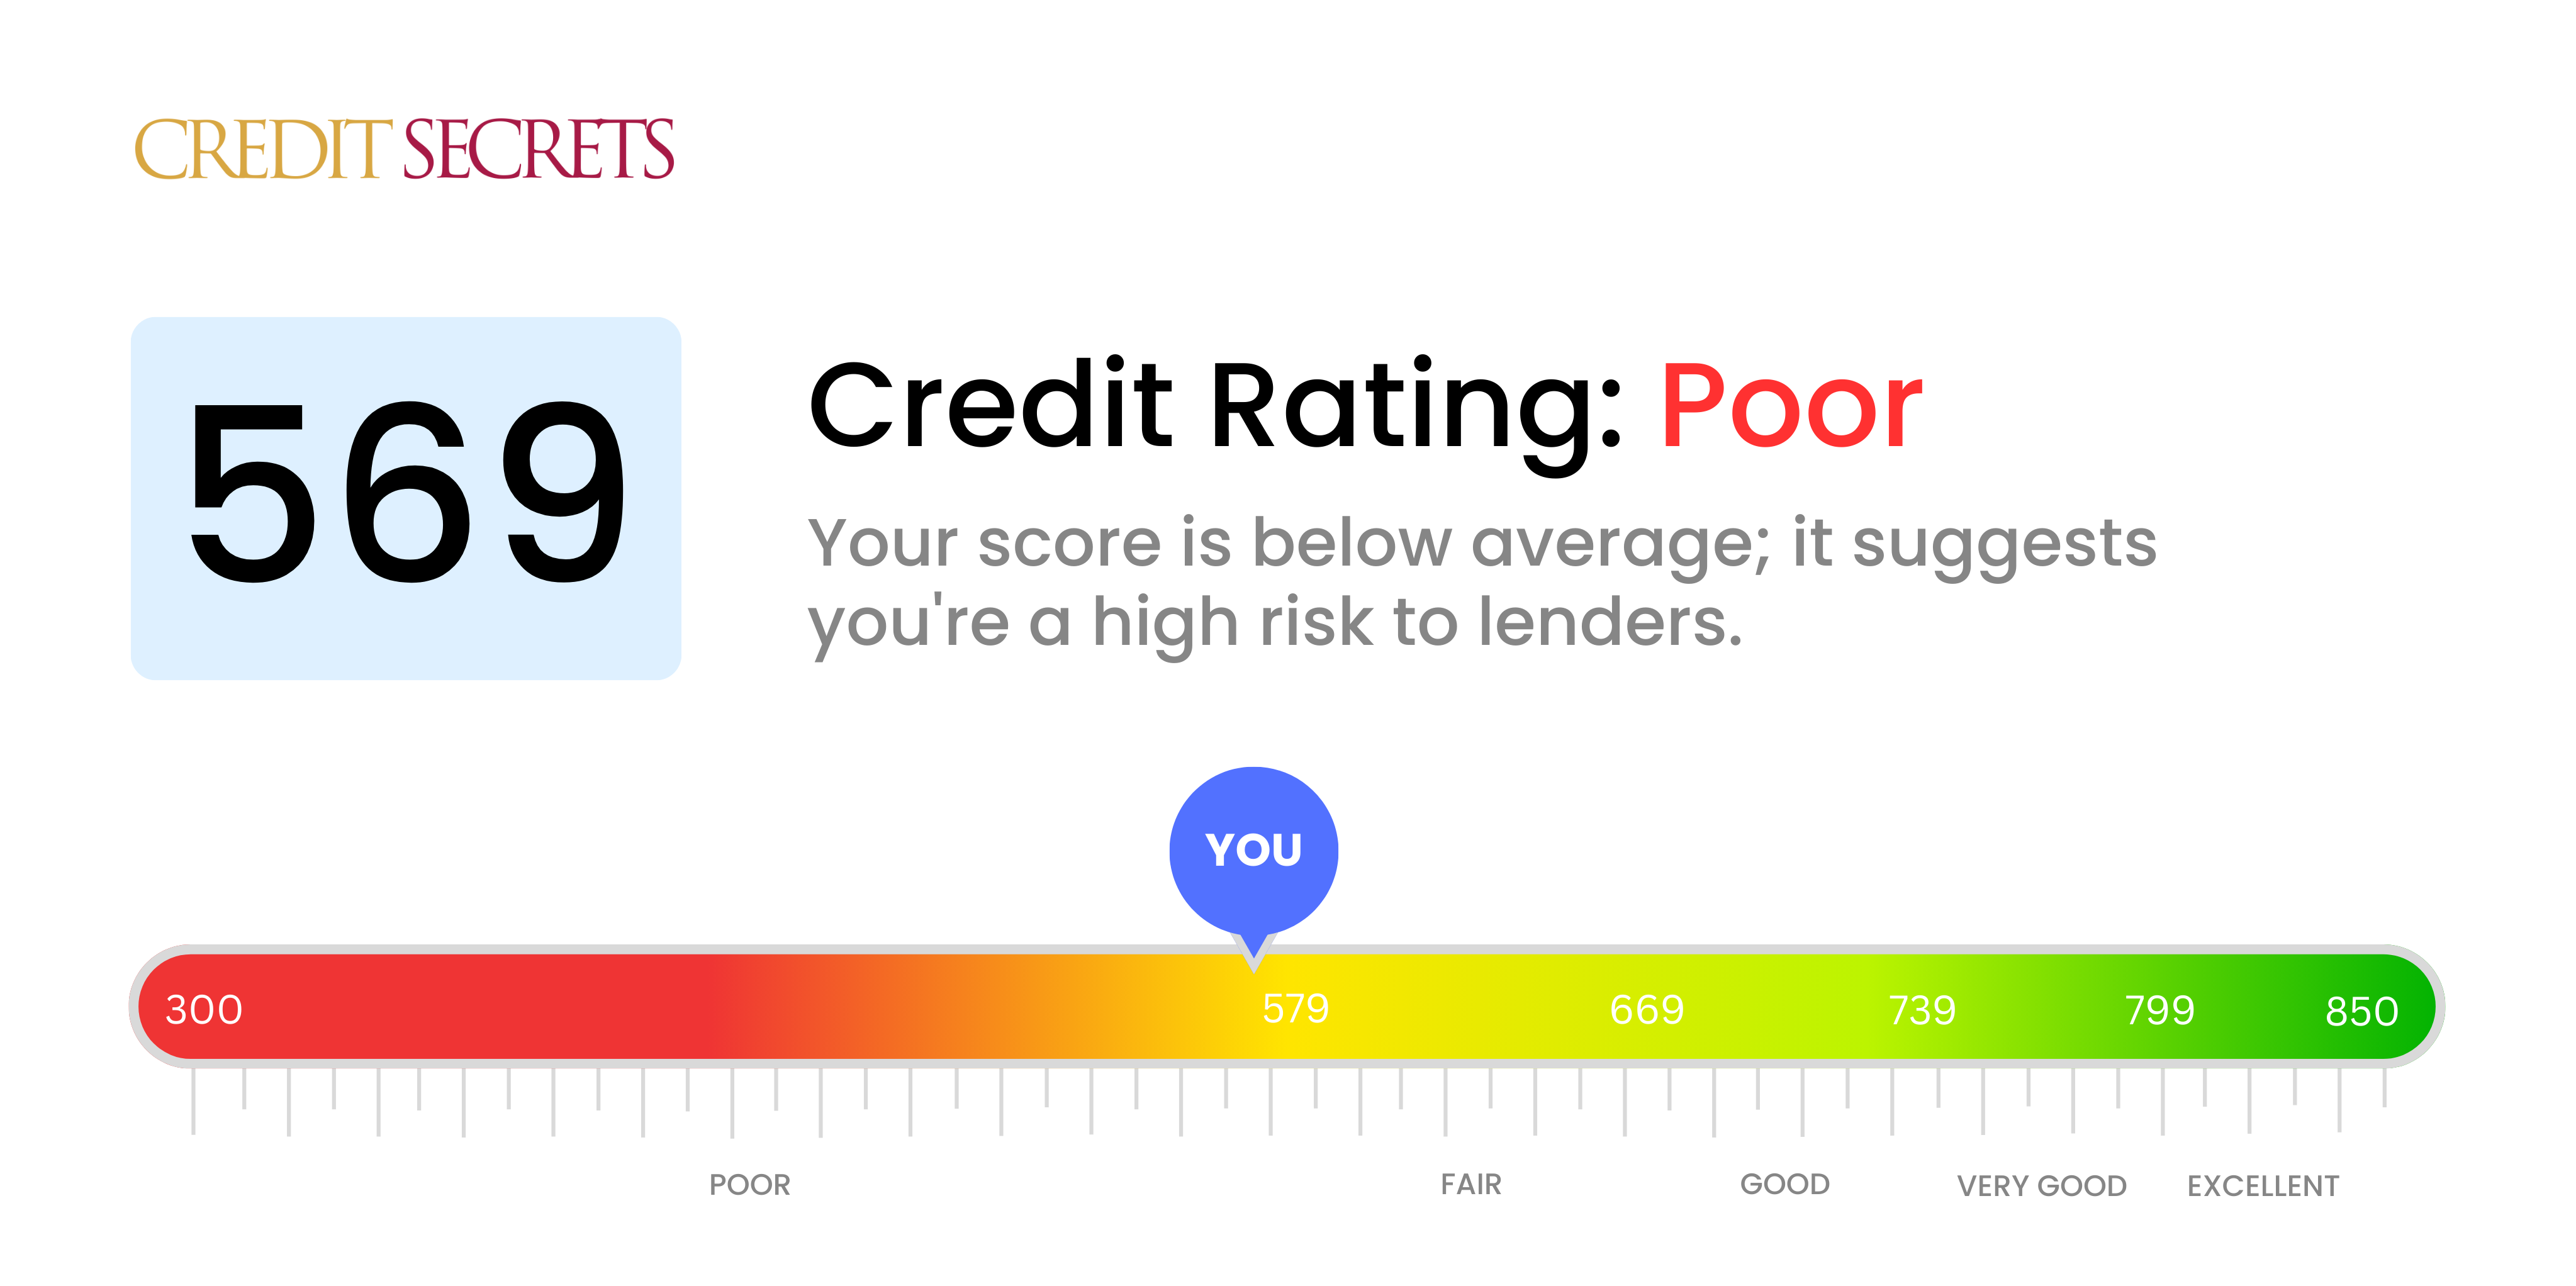 Is 569 a good credit score?